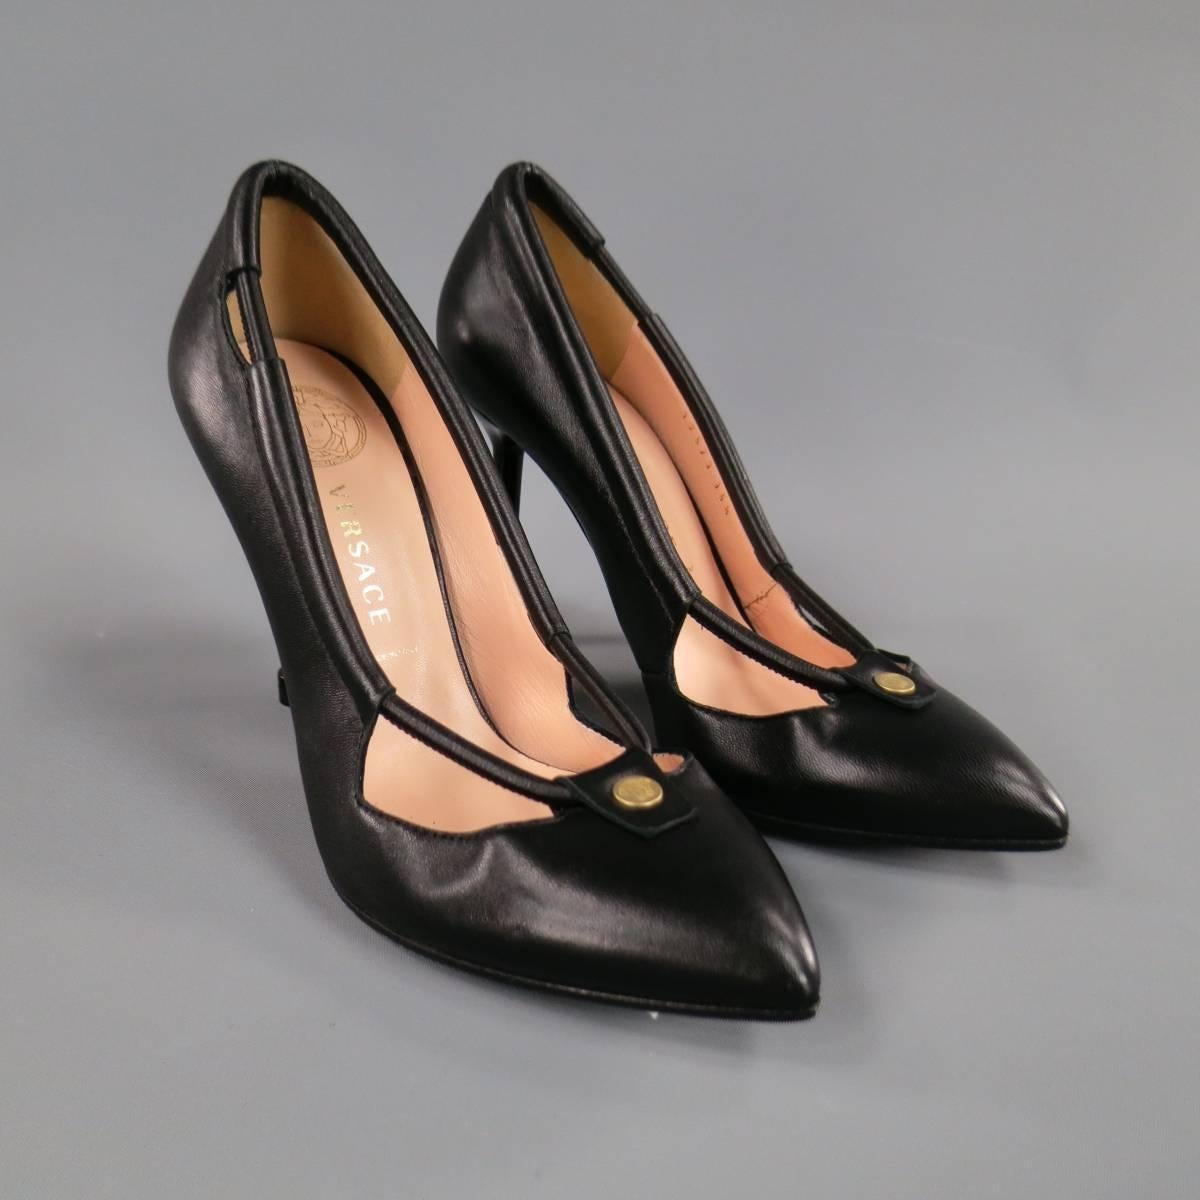 These fabulous VERSACE pumps come in smooth black leather and feature a pointed toe with gold tone engraved Medusa stud, cut outs with elastic band piping, and unique lacquered heel. Made in Italy.
Retails at $520.00.
Excellent Pre-Owned